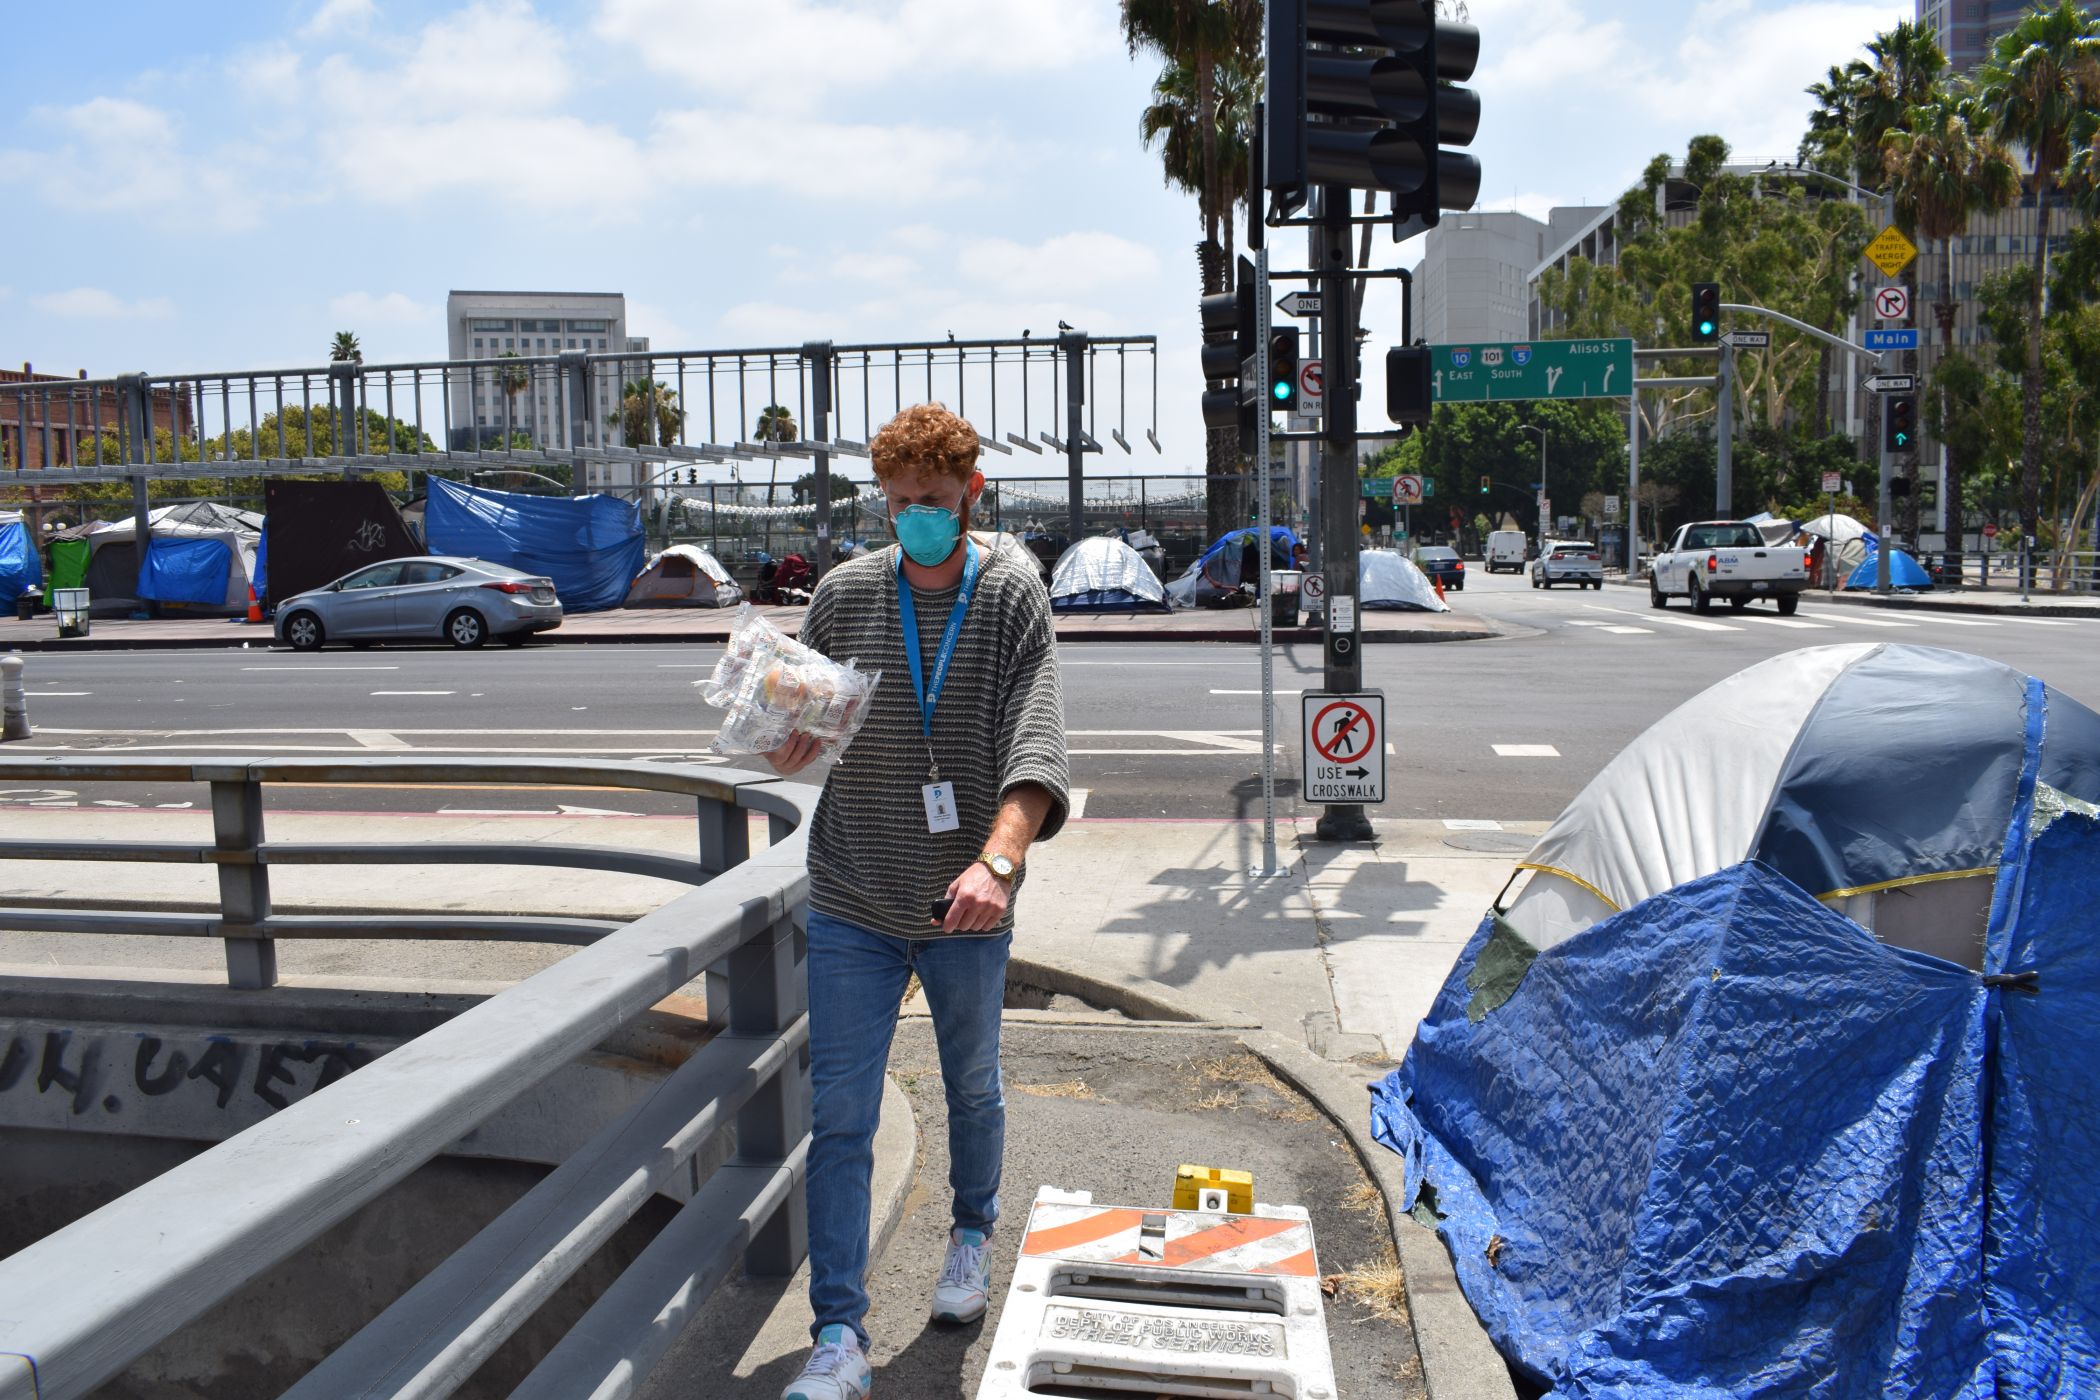 A volunteer bringing supplies to a homeless camp site